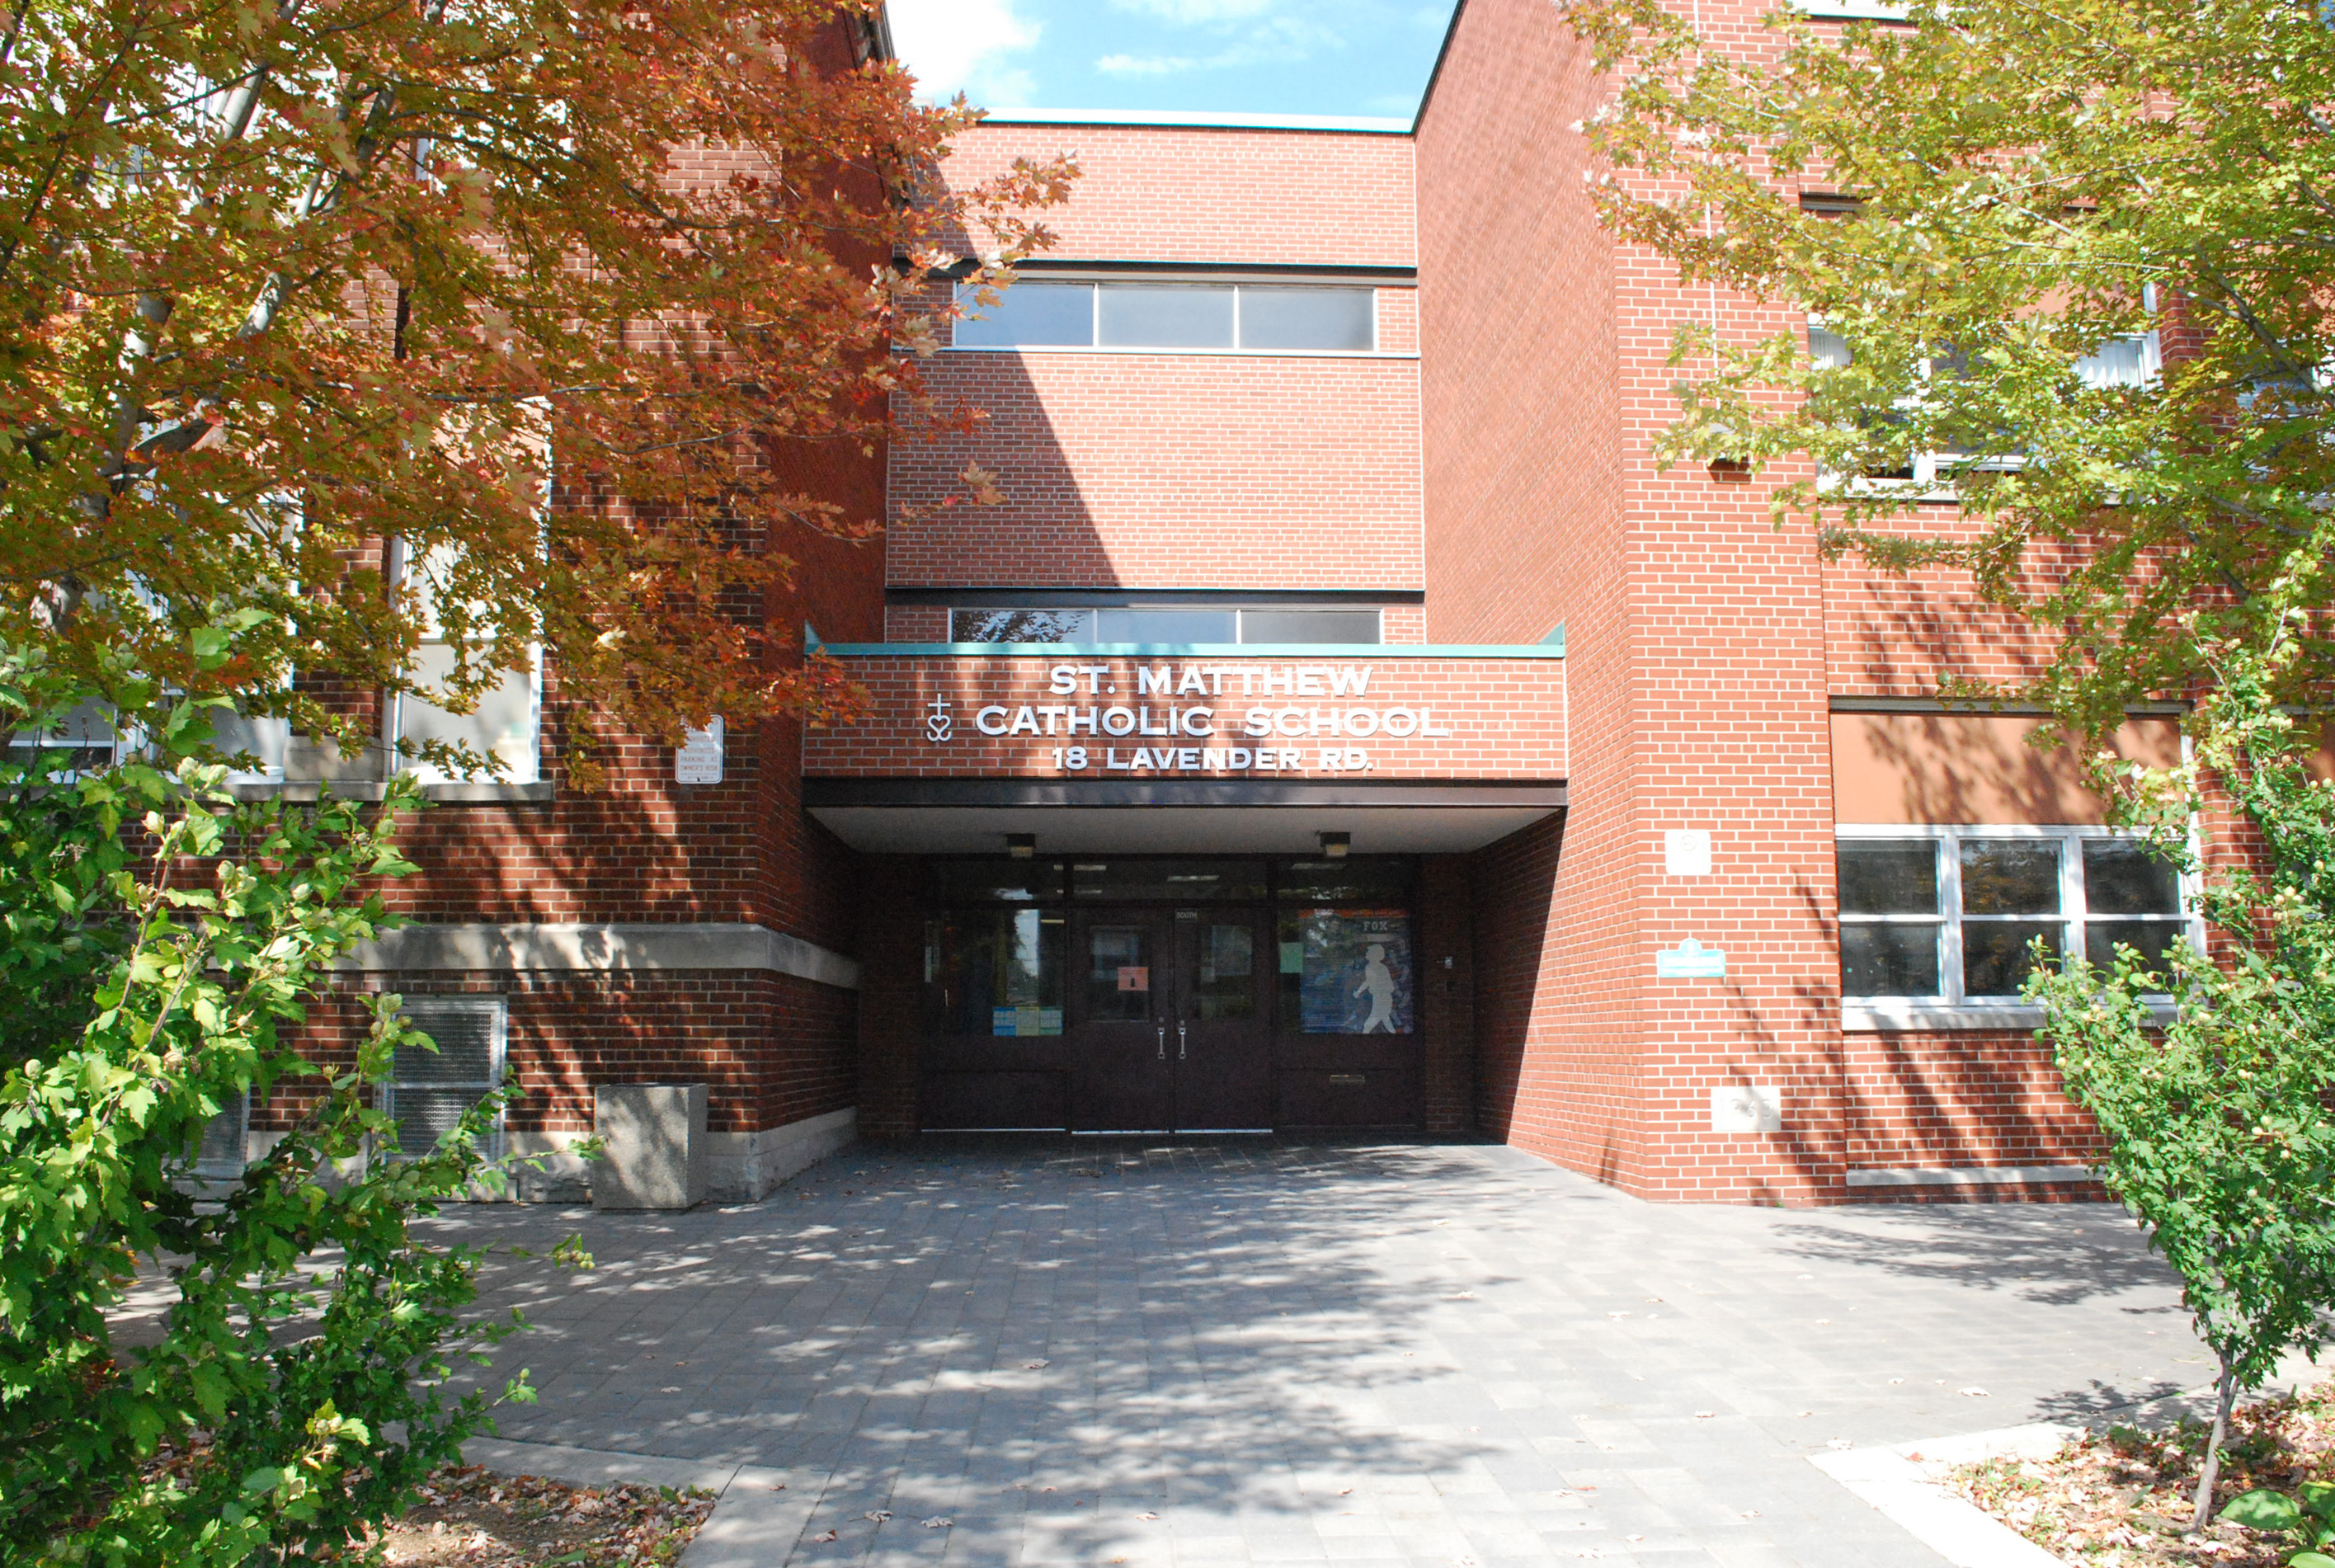 The front of the St. Matthew Catholic School building.